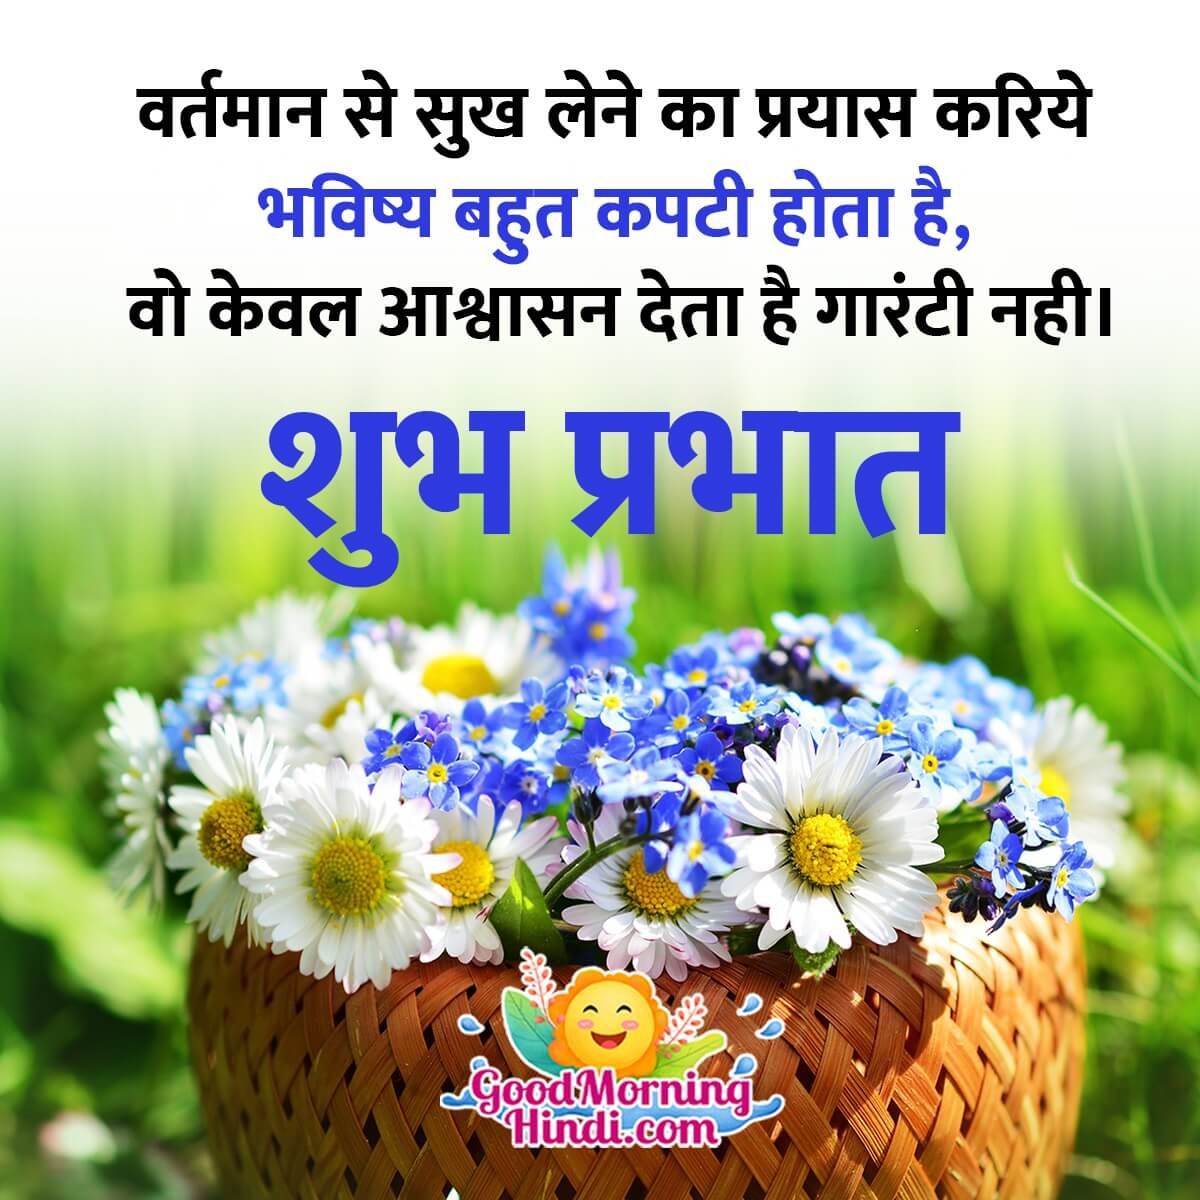 Top 999+ good morning quotes images in hindi – Amazing Collection good morning quotes images in hindi Full 4K